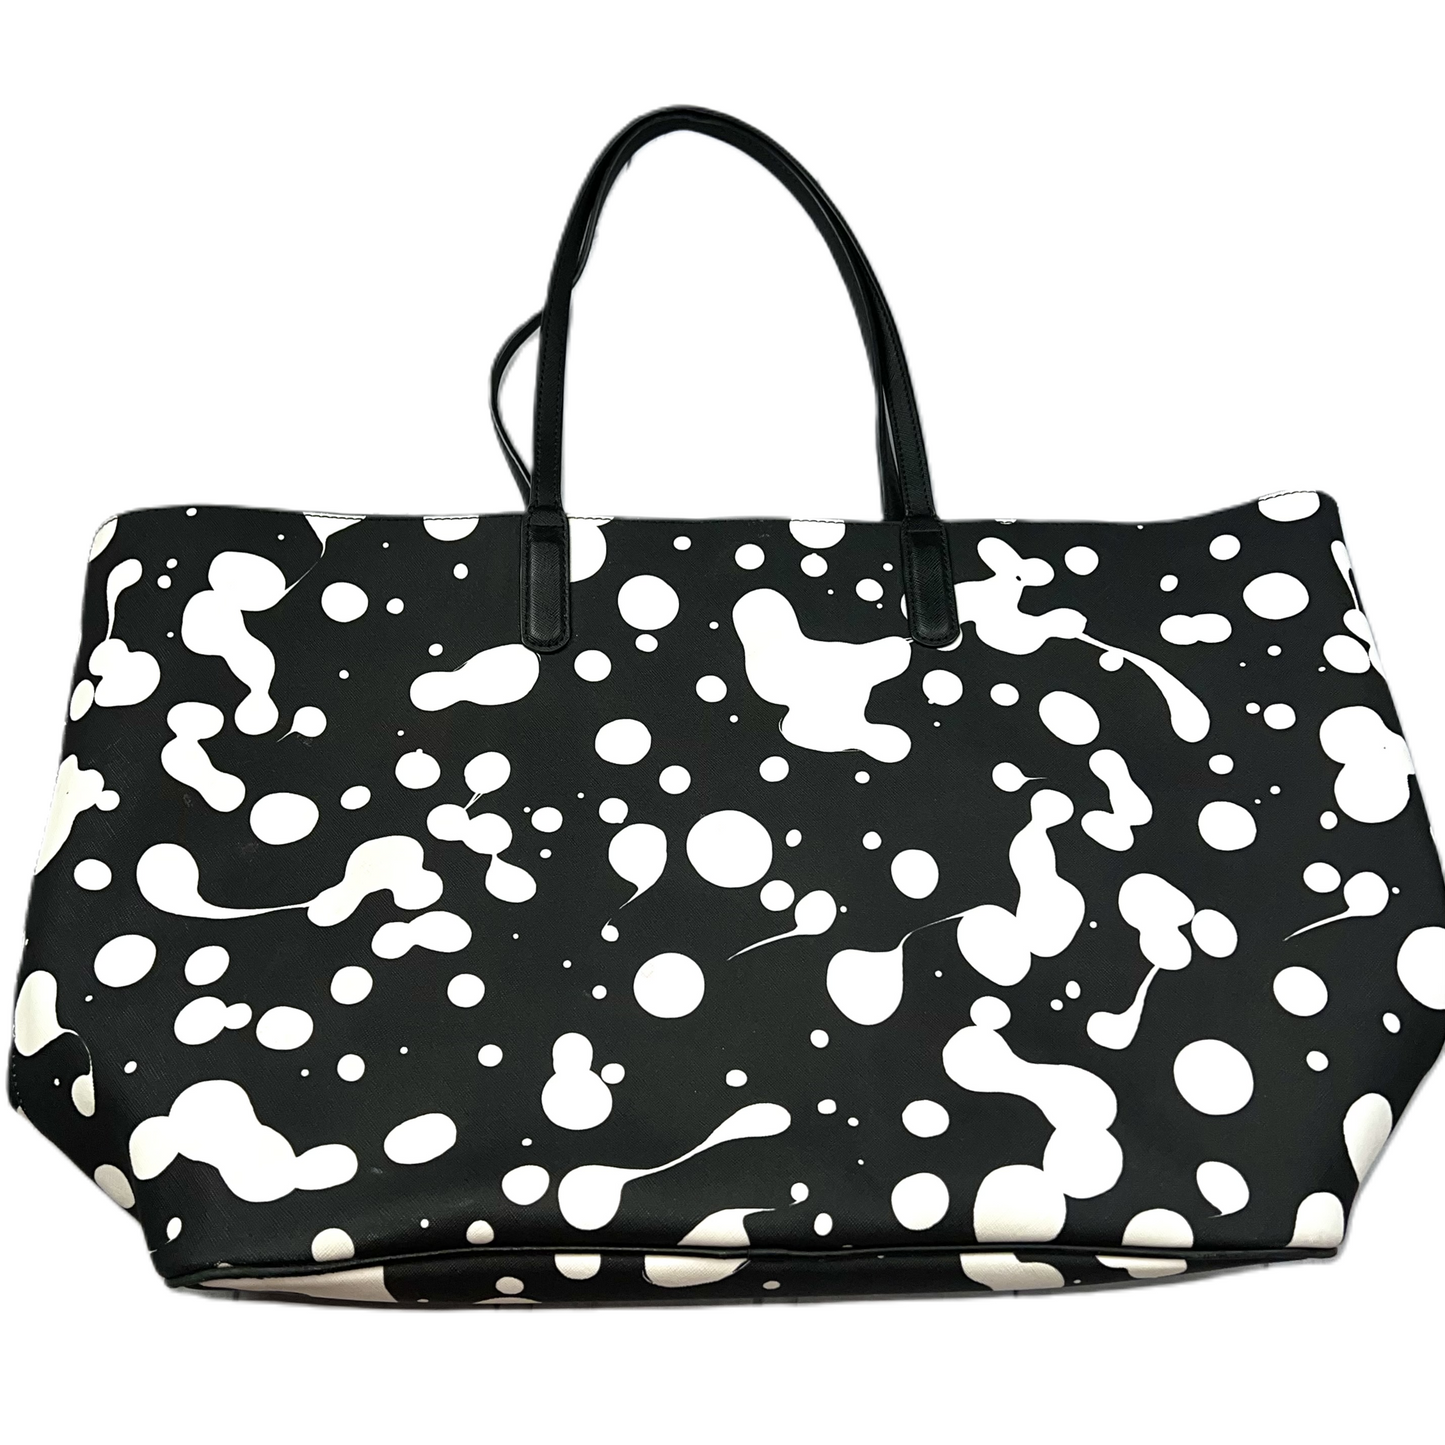 Tote Designer By Marc By Marc Jacobs, Size: Large